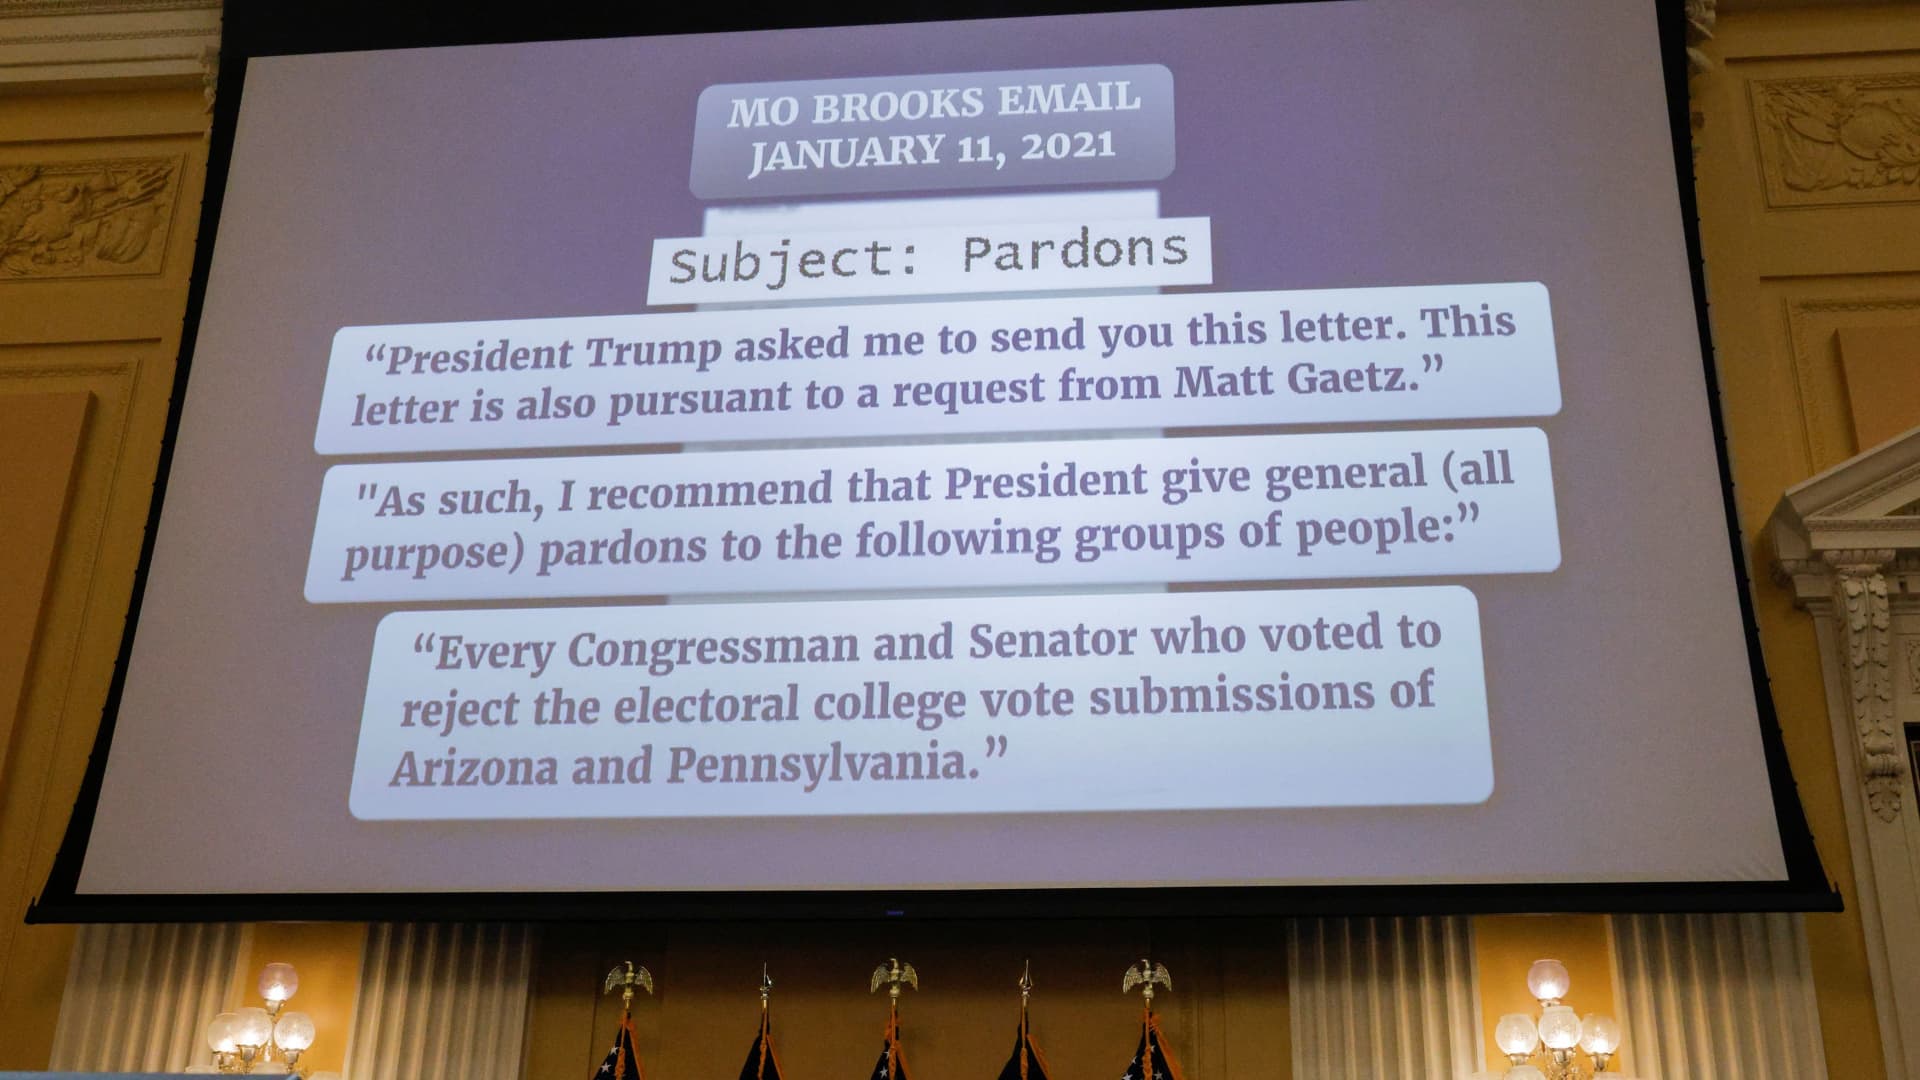 Excerpts from an email by U.S. Rep. Mo Brooks (R-AL) to former White House Chief of Staff Mark Meadows asking for pardons for members of Congress are shown on a screen during the fifth public hearing of the U.S. House Select Committee to Investigate the January 6 Attack on the United States Capitol, on Capitol Hill in Washington, U.S., June 23, 2022.